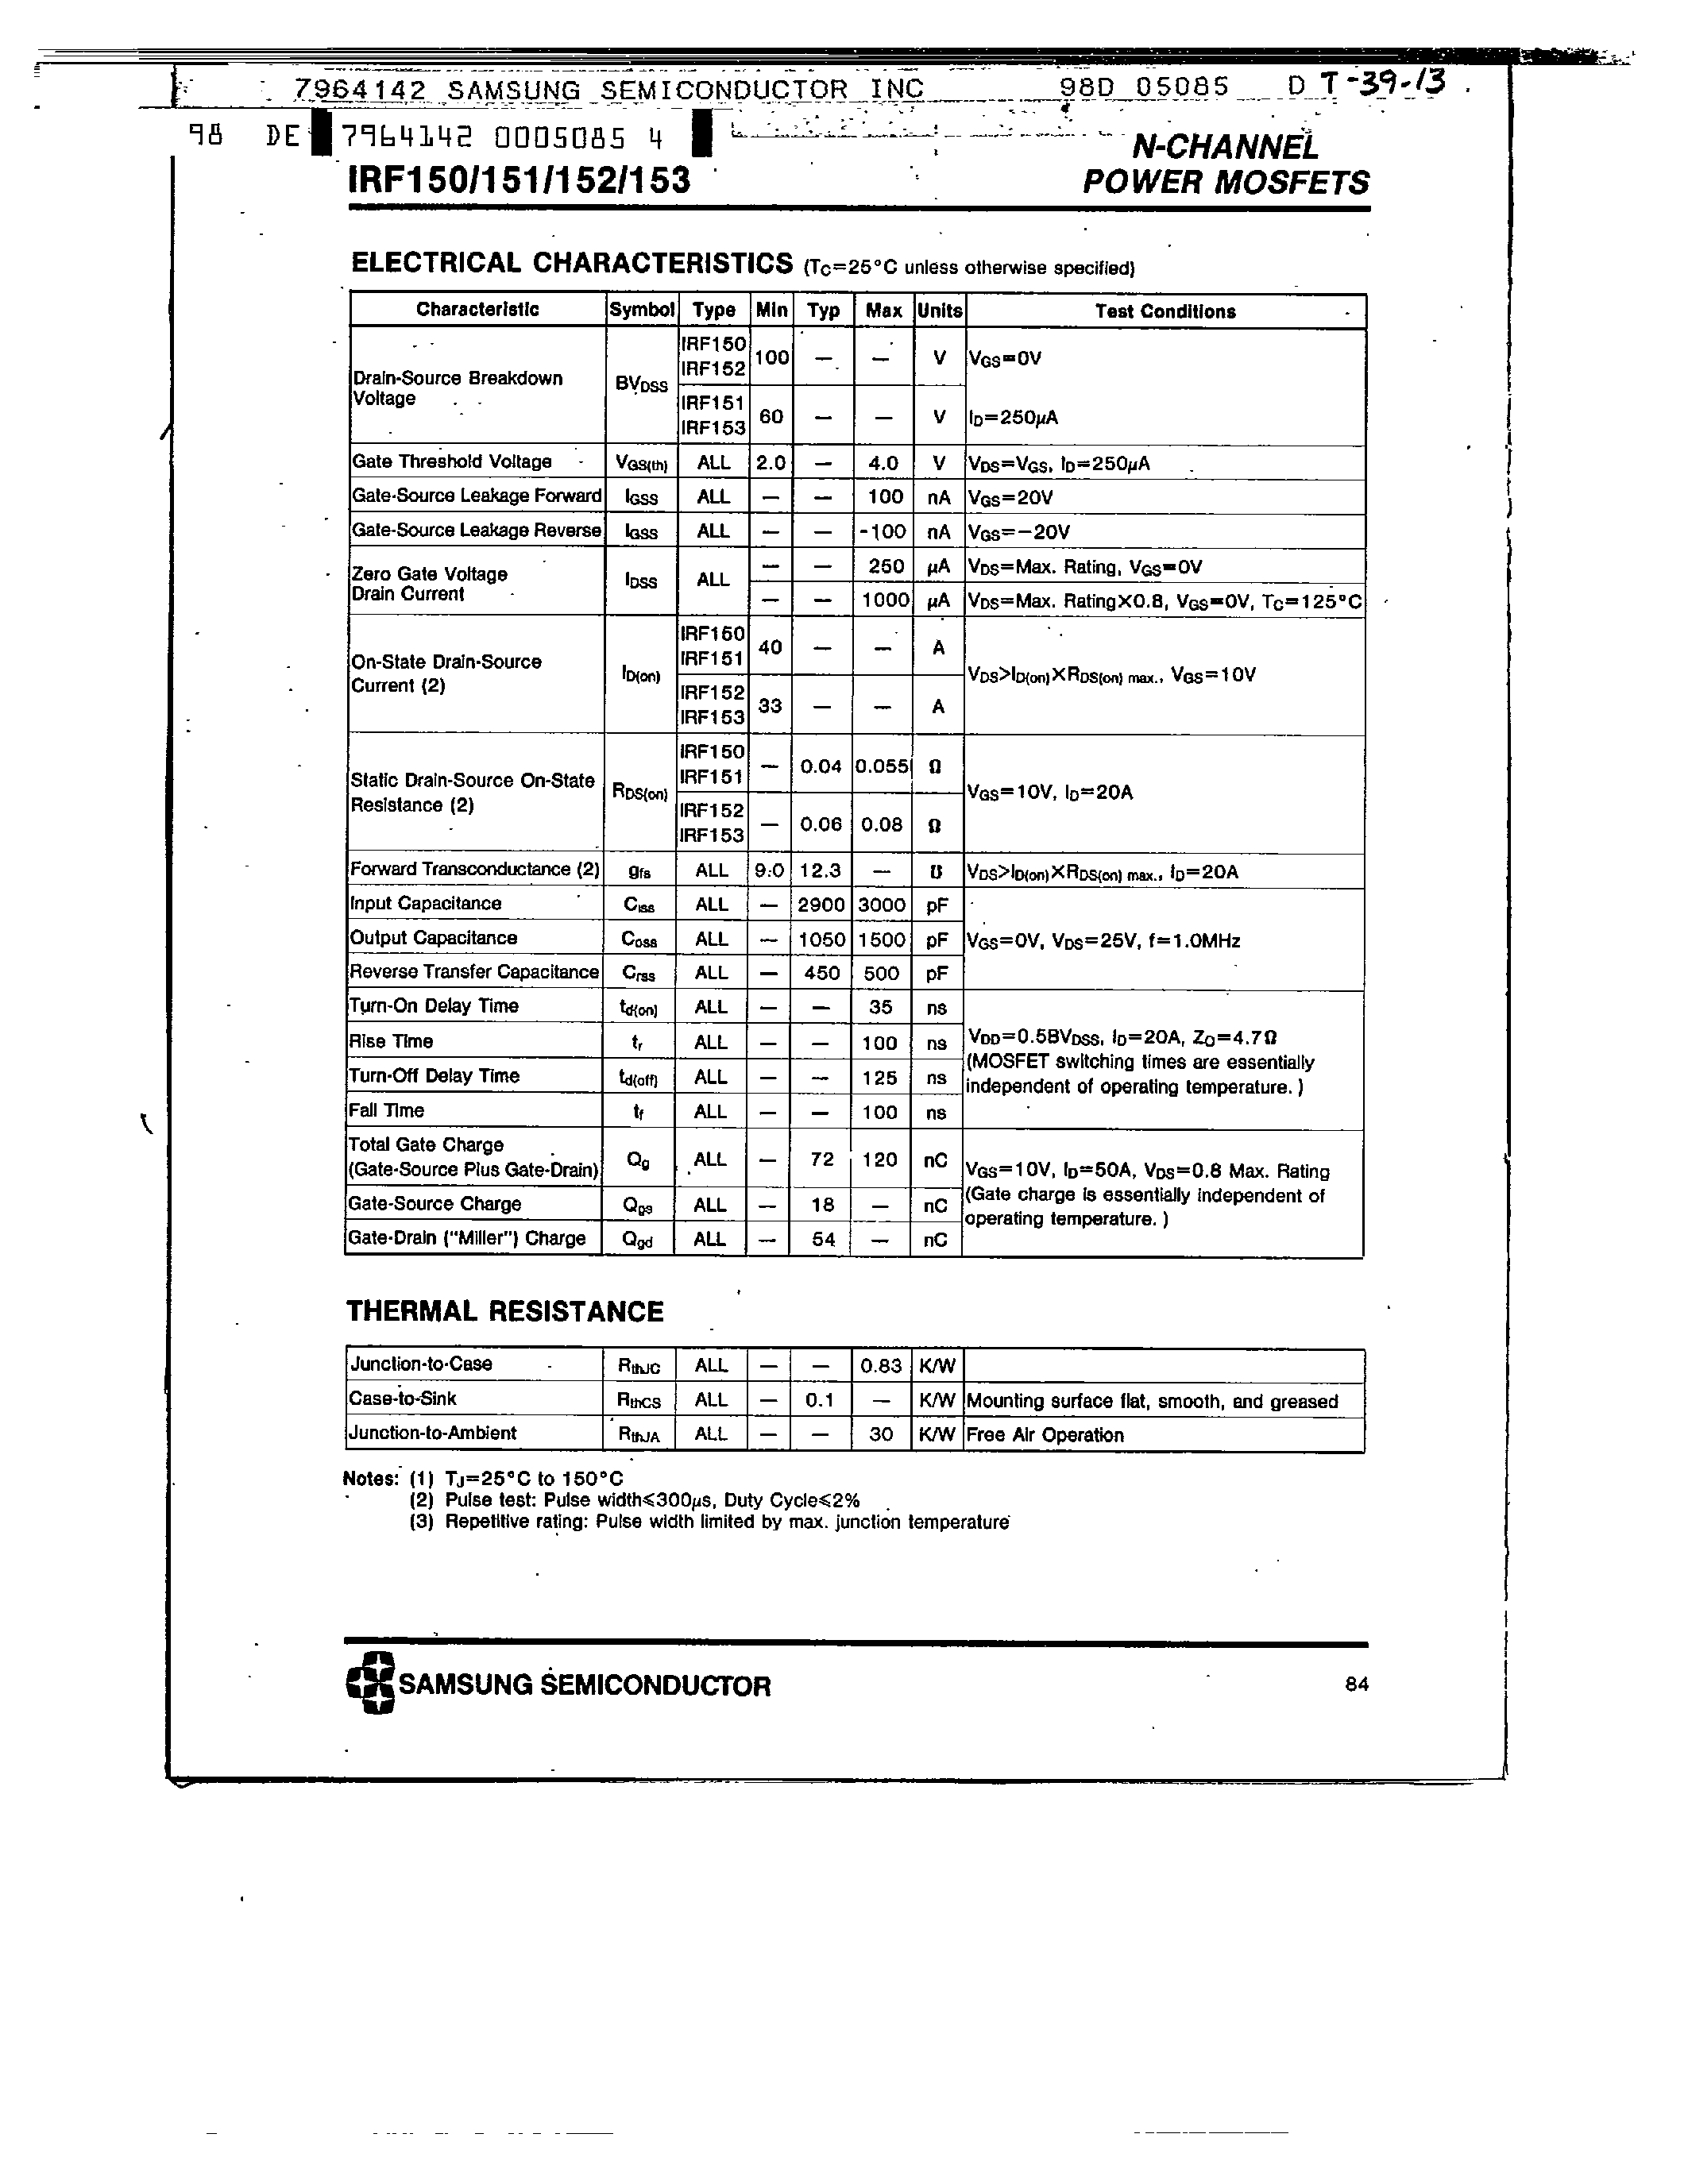 Datasheet IRF151 - N-CHANNEL POWER MOSFETS page 2